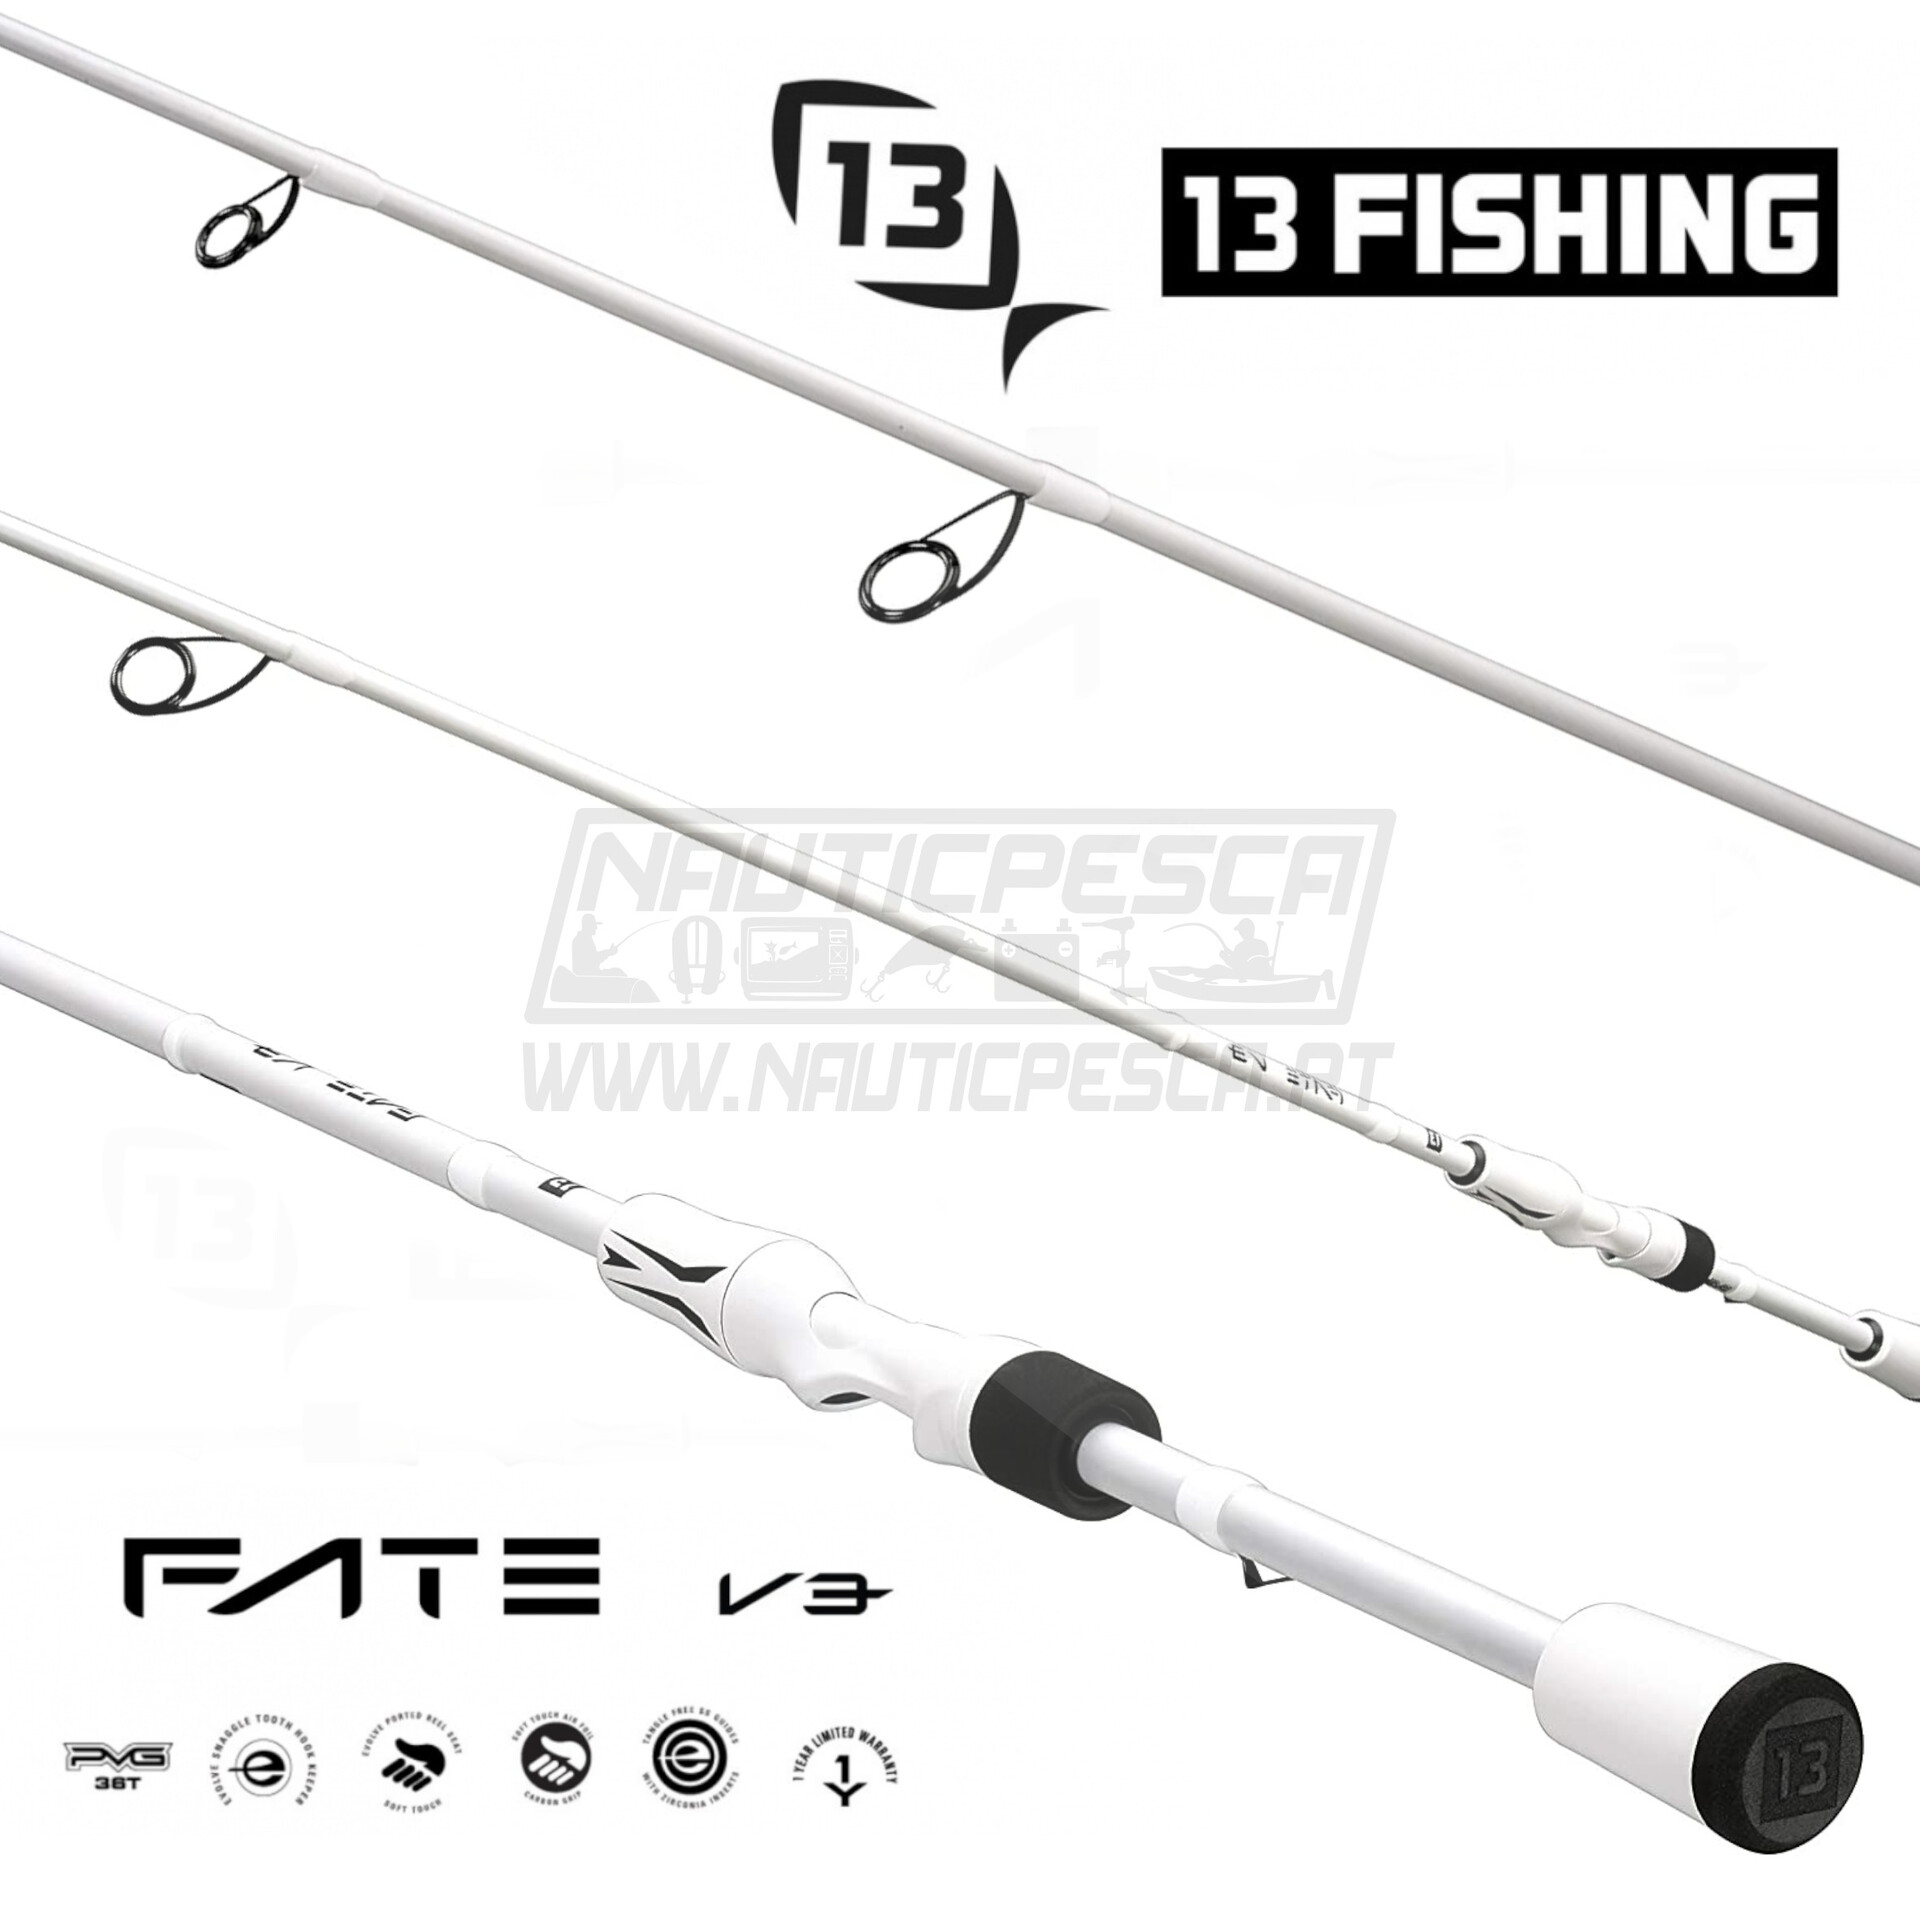 13 Fishing Fate Fate V3 Spinning